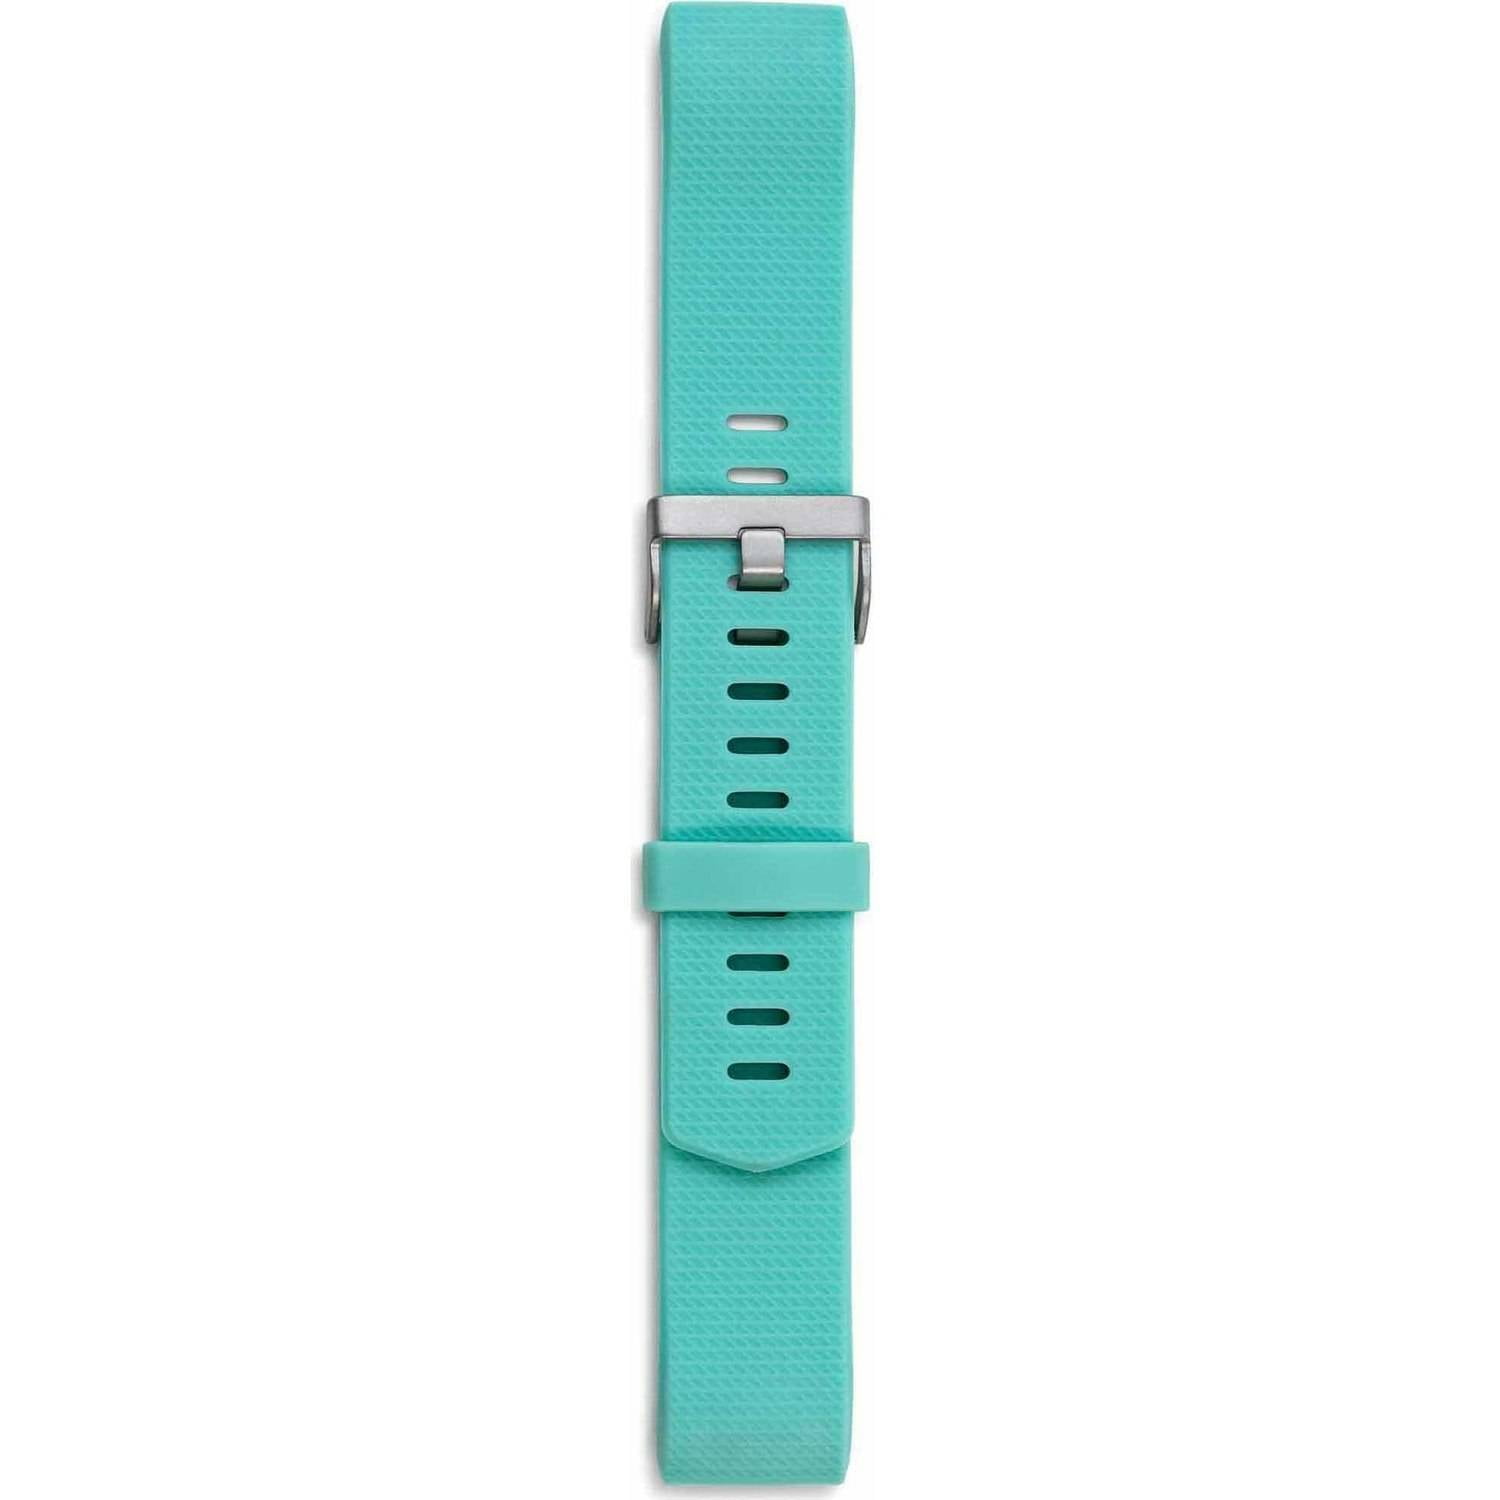 Onn Replacement Band for Fitbit Flex 2 White with Metal Buckle NEW 